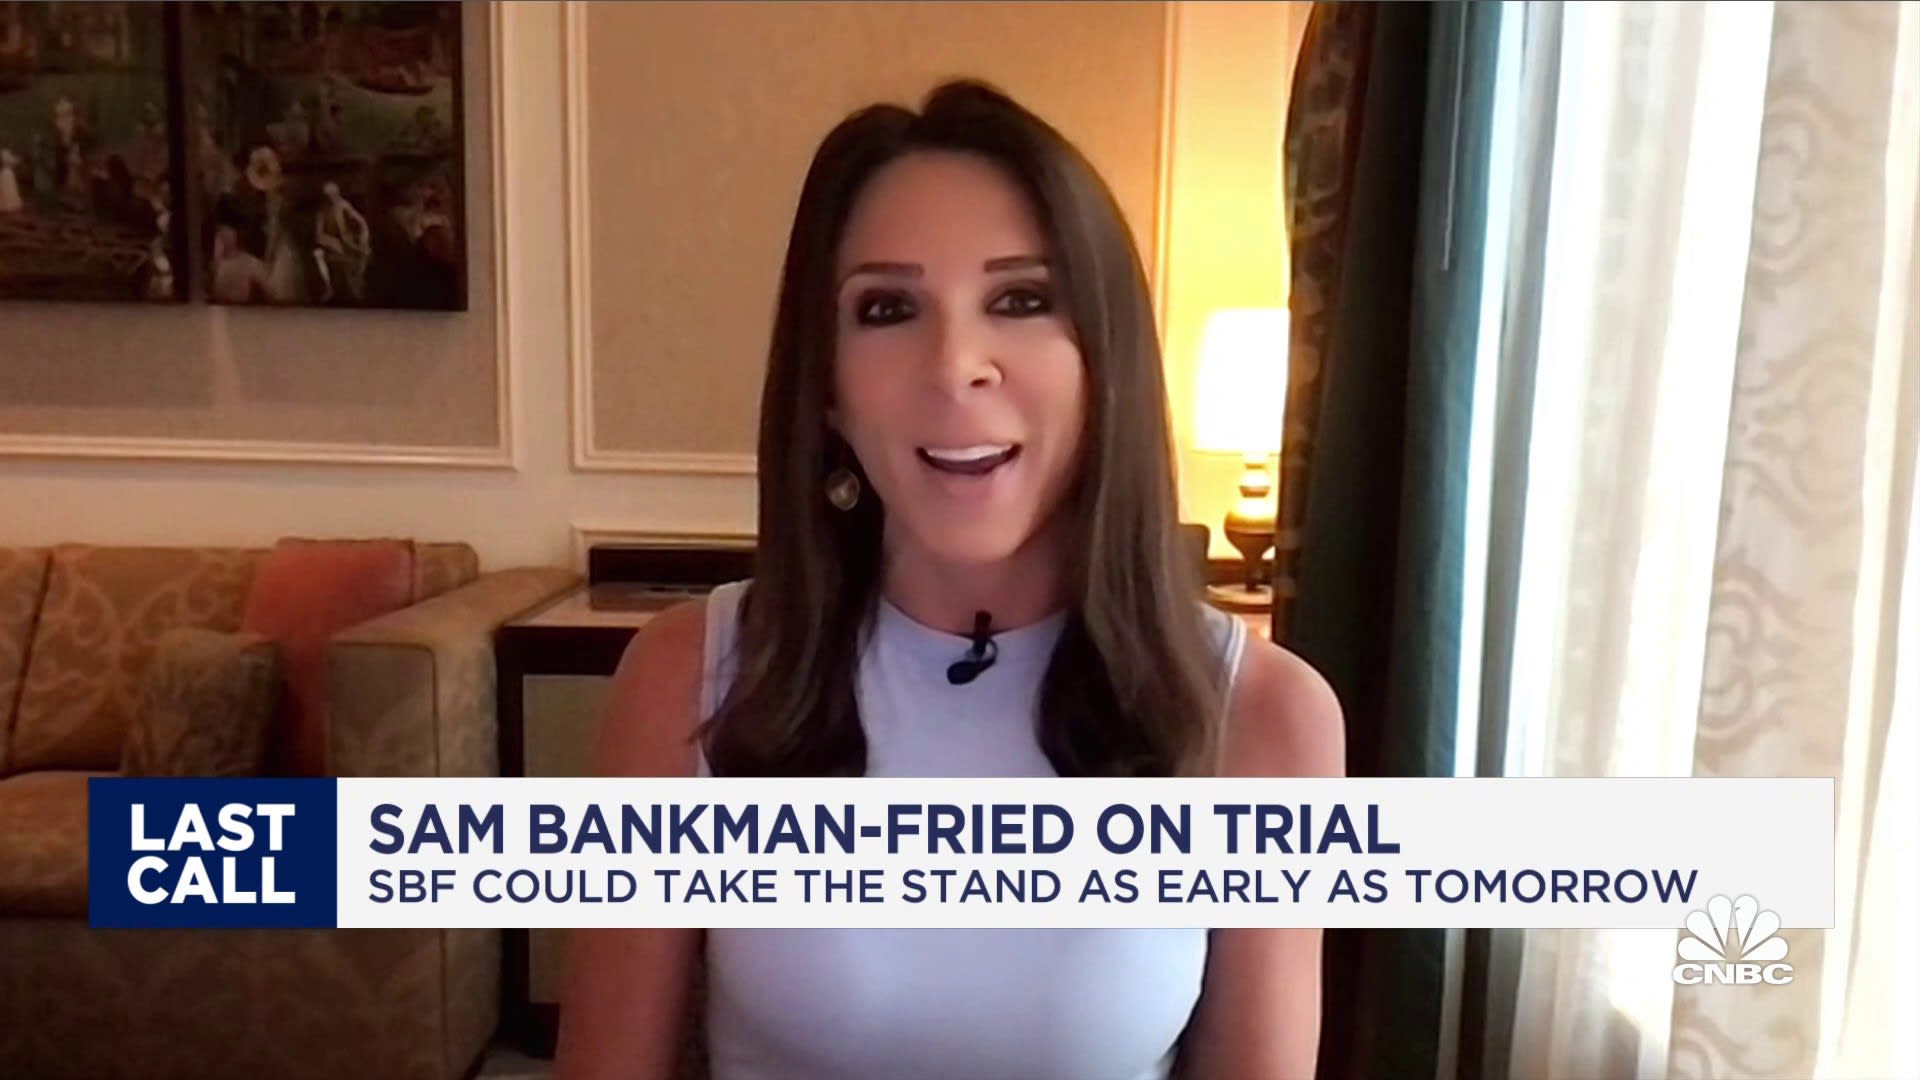 Sam Bankman-Fried set to testify at fraud trial in what experts deem a major gamble for the case